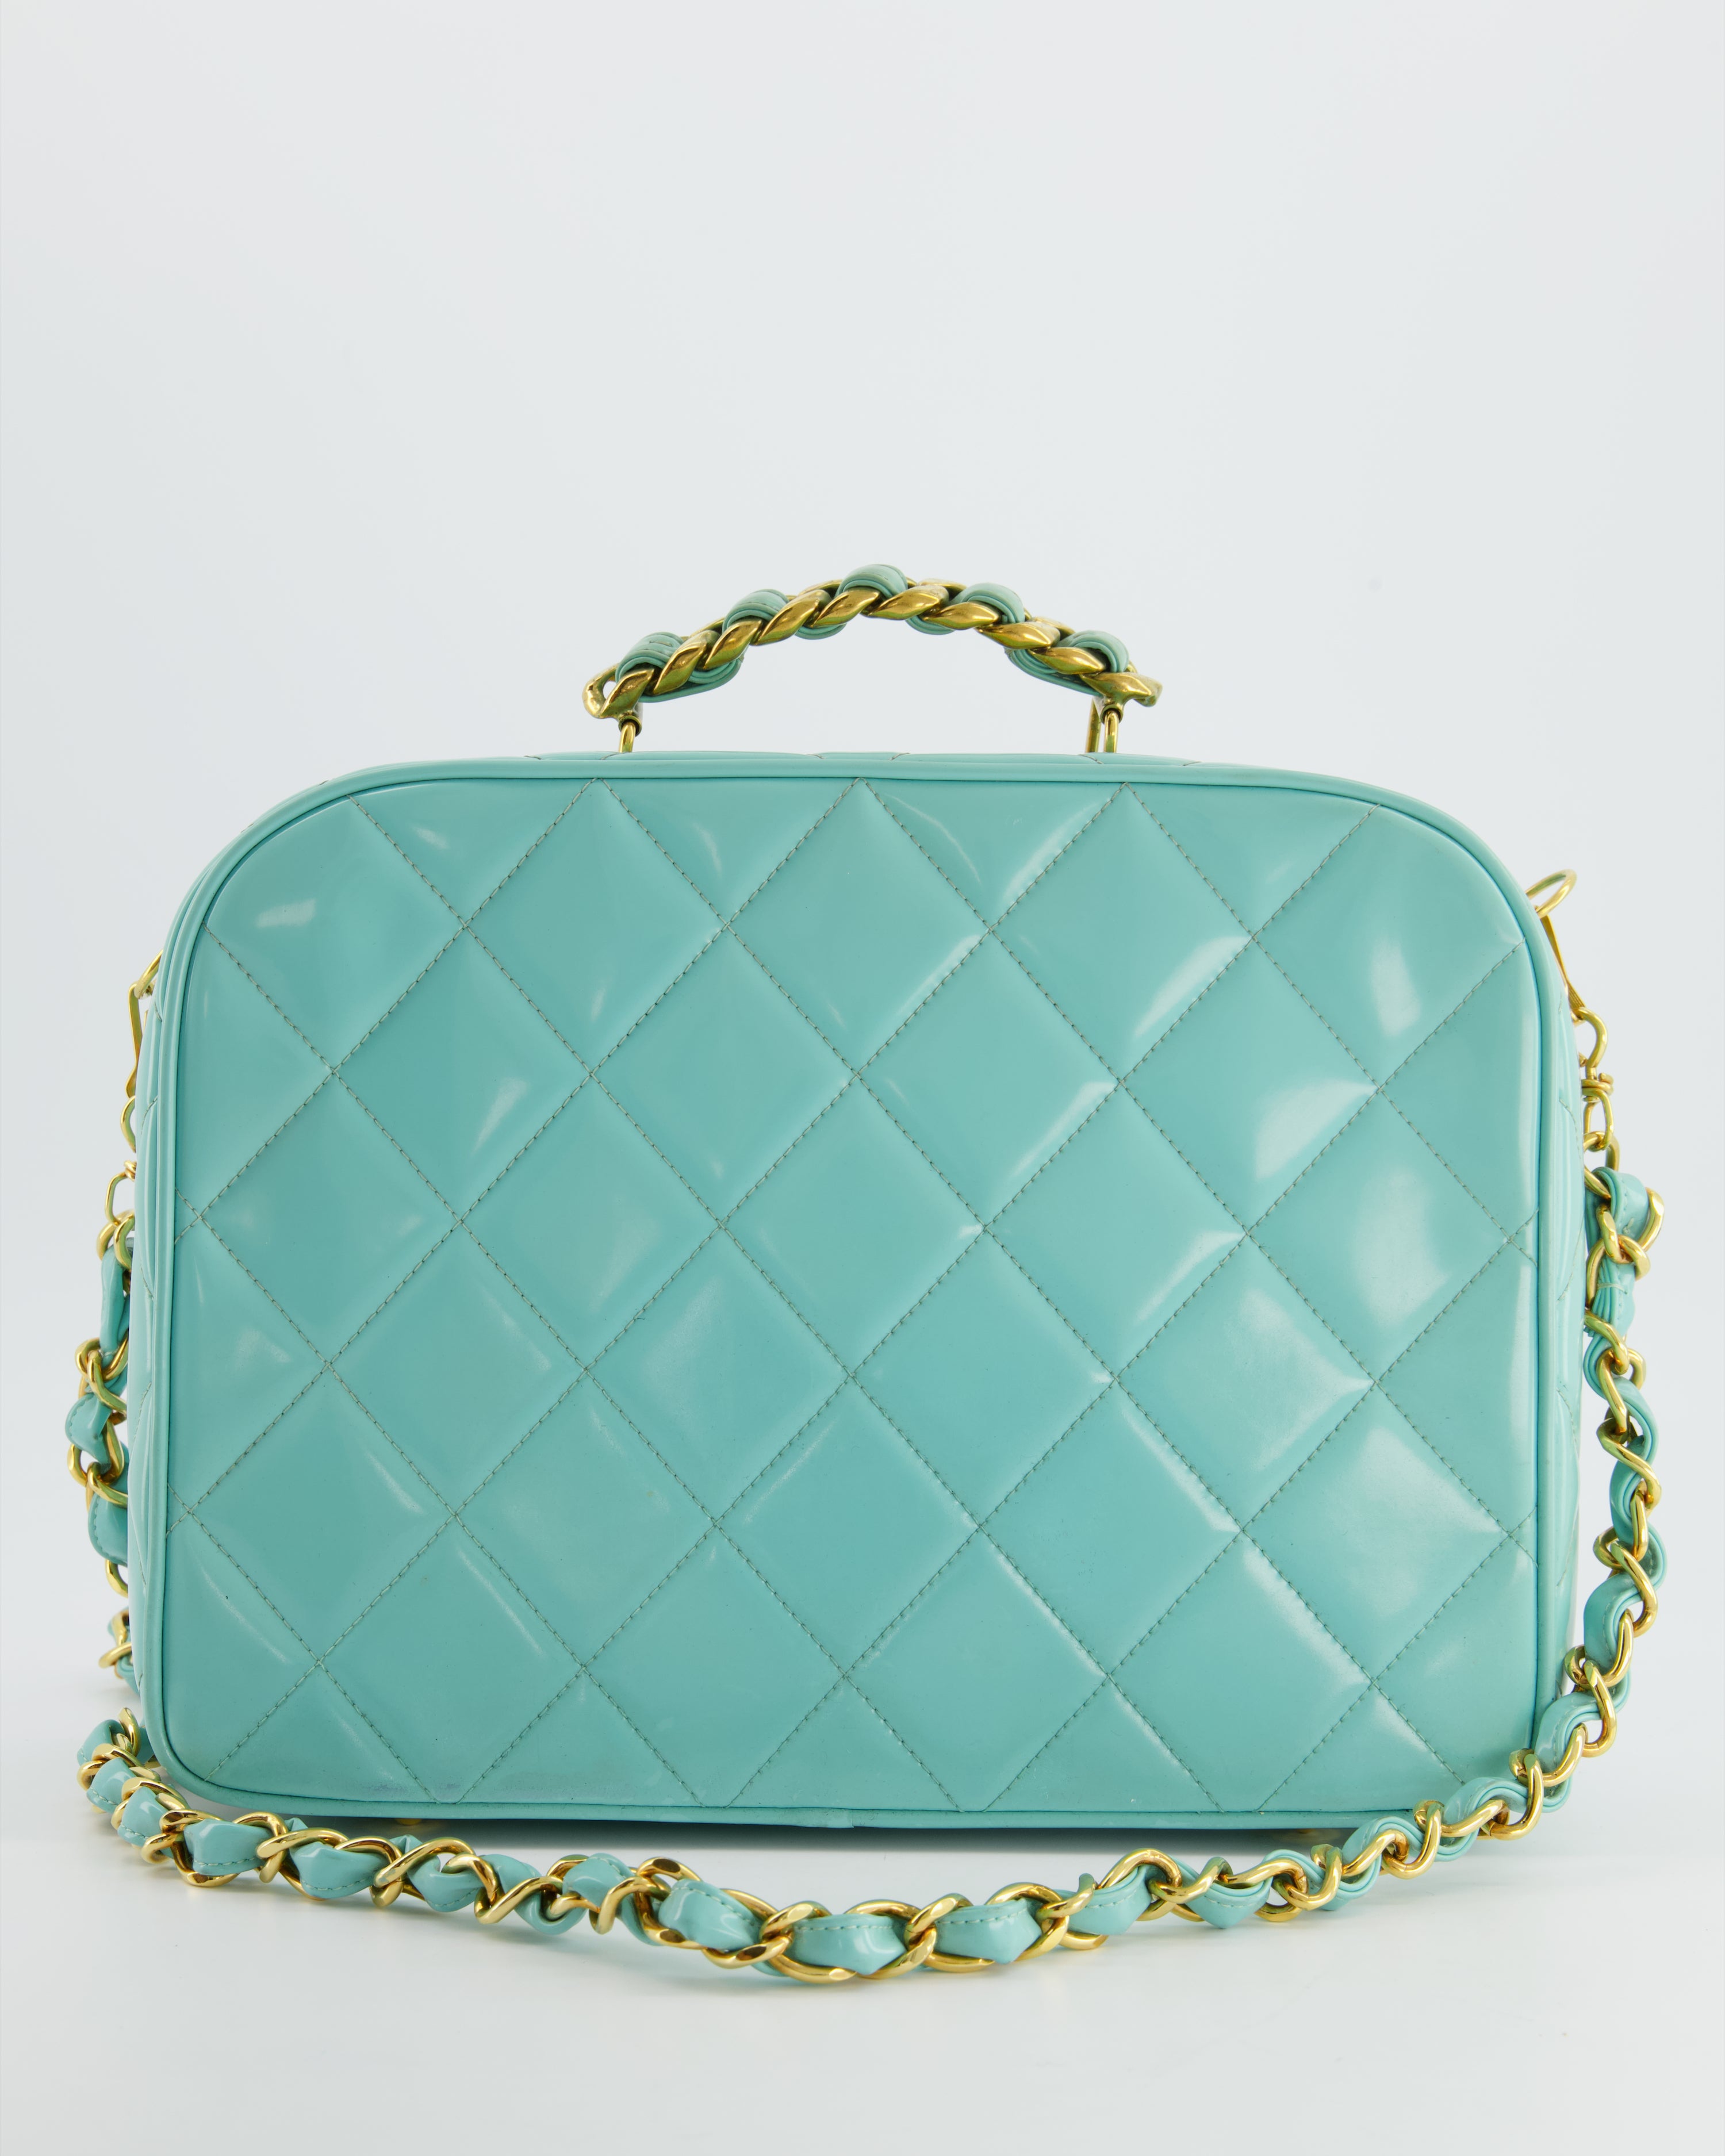 Chanel Vintage Blue Candy Vanity-Case Bag in Patent Leather with